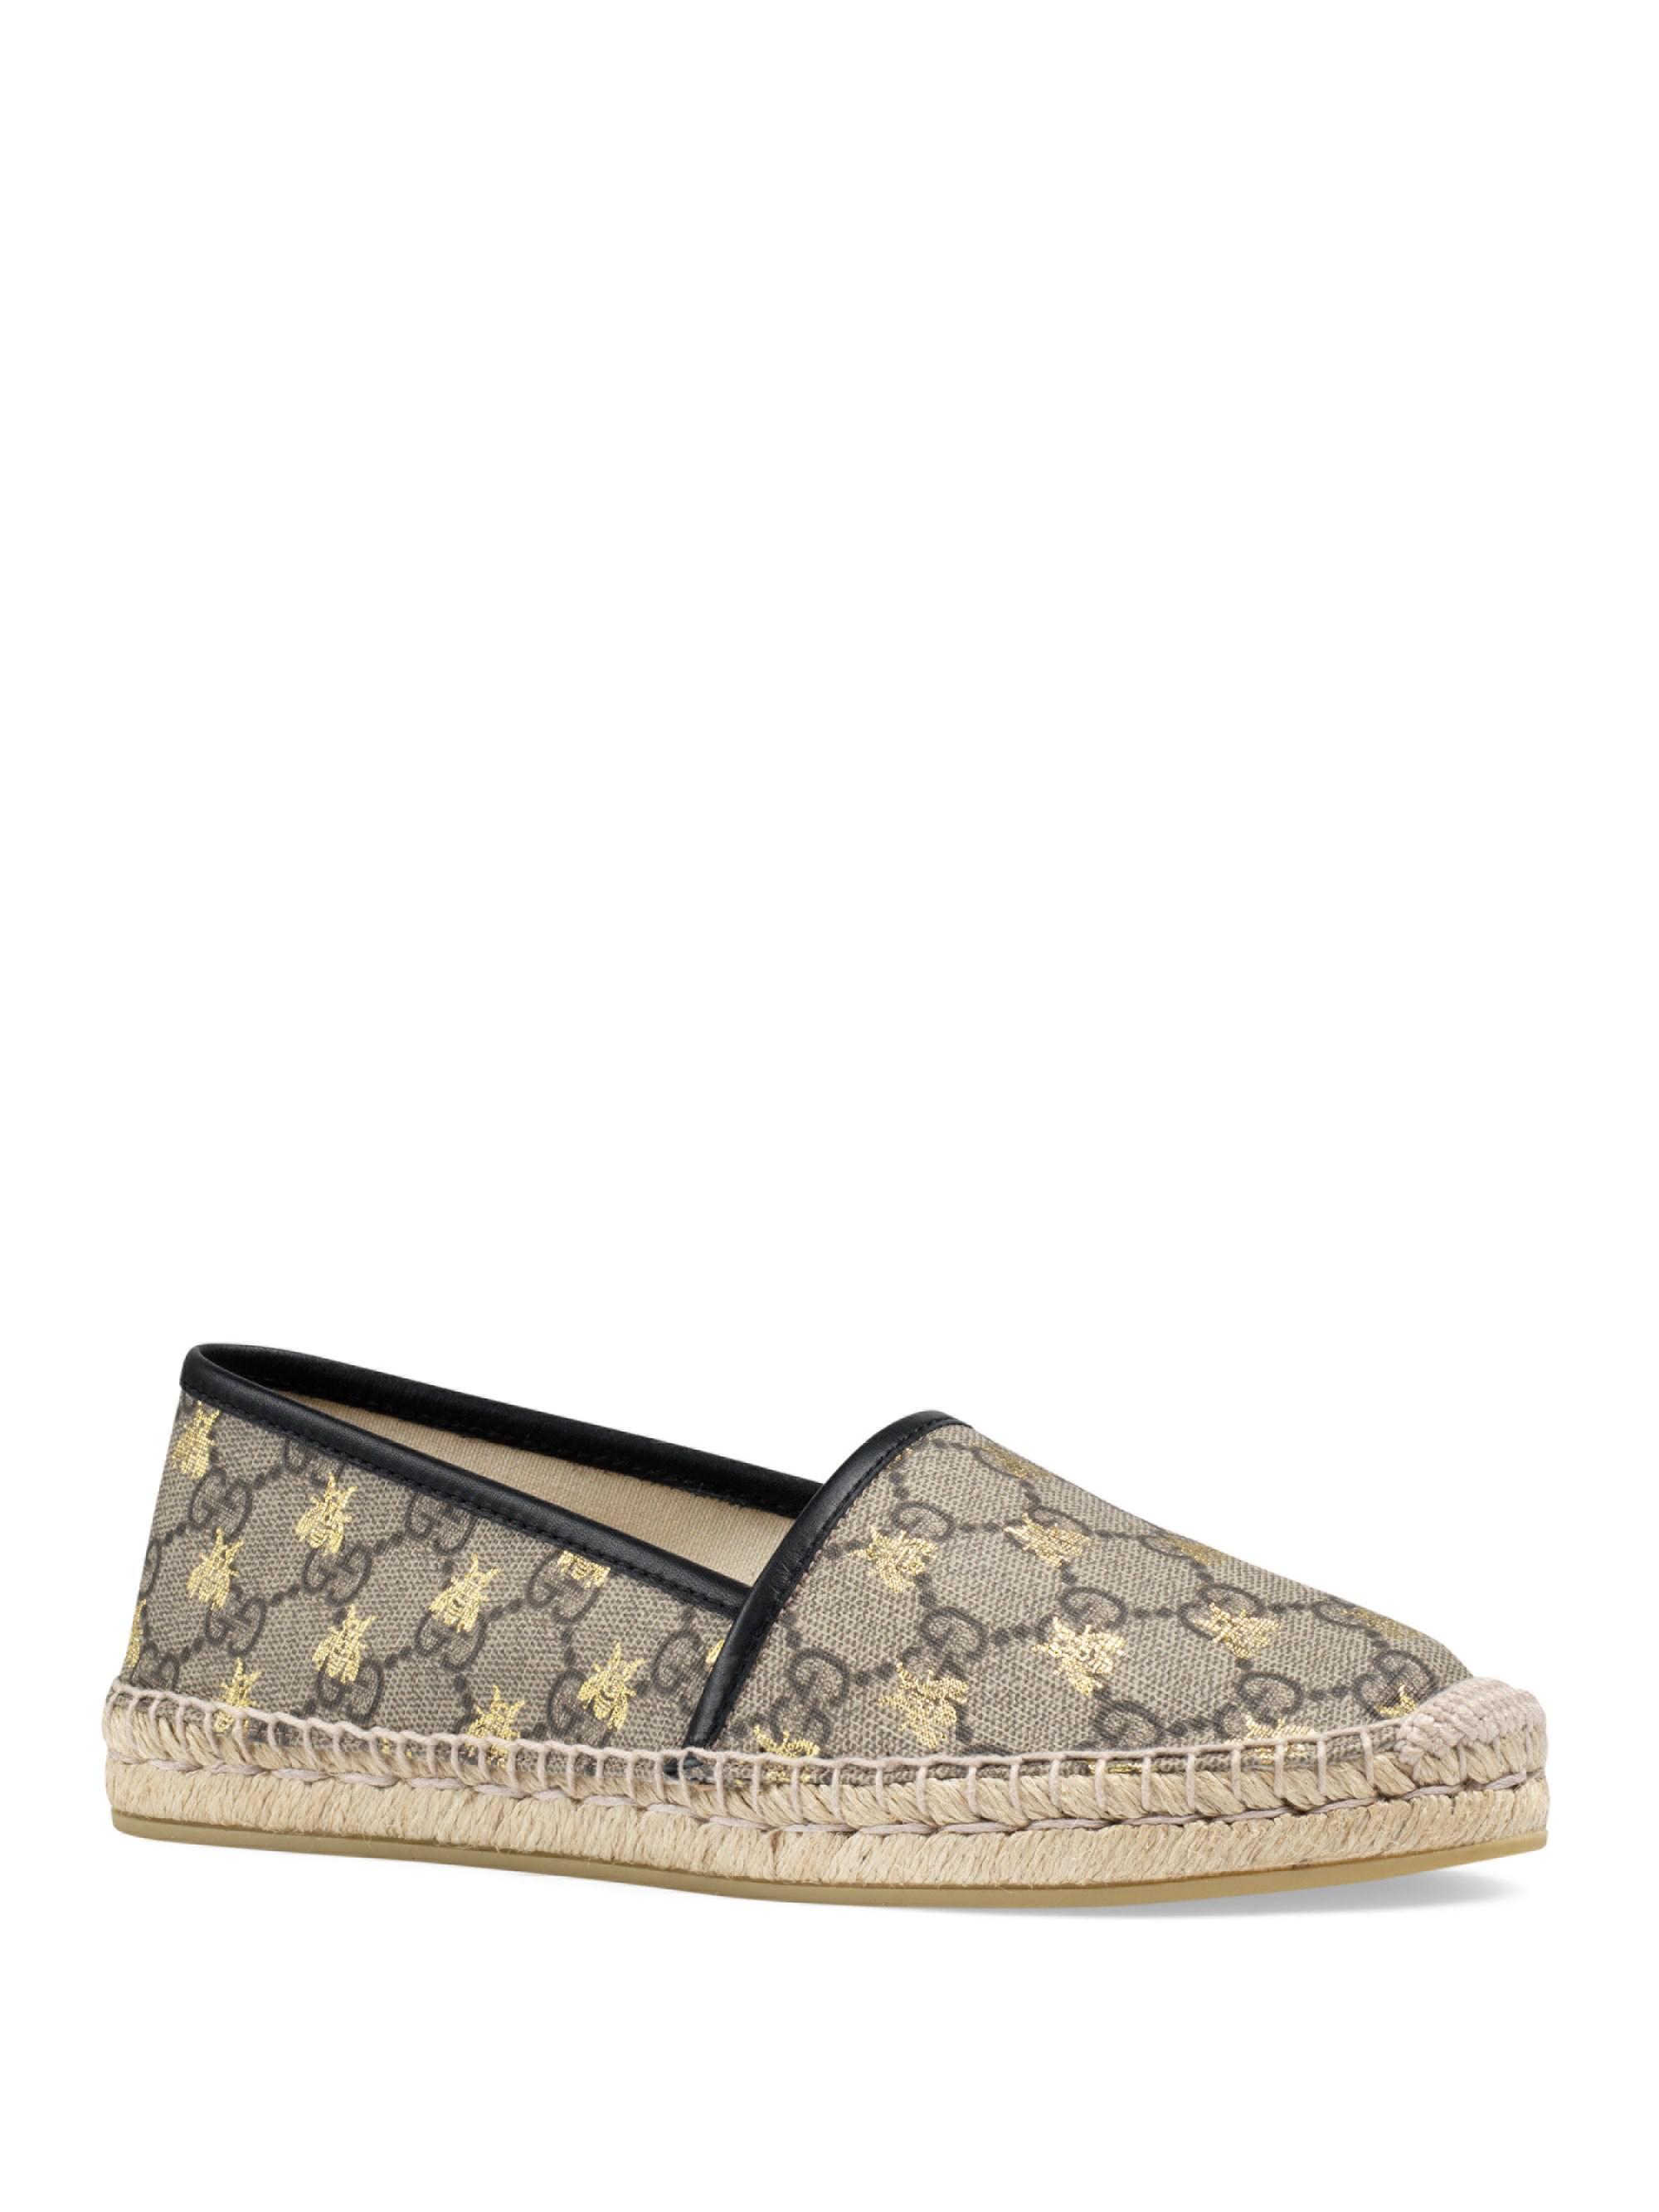 Gucci Canvas GG Supreme Bees Espadrilles in Beige (Natural) - Lyst